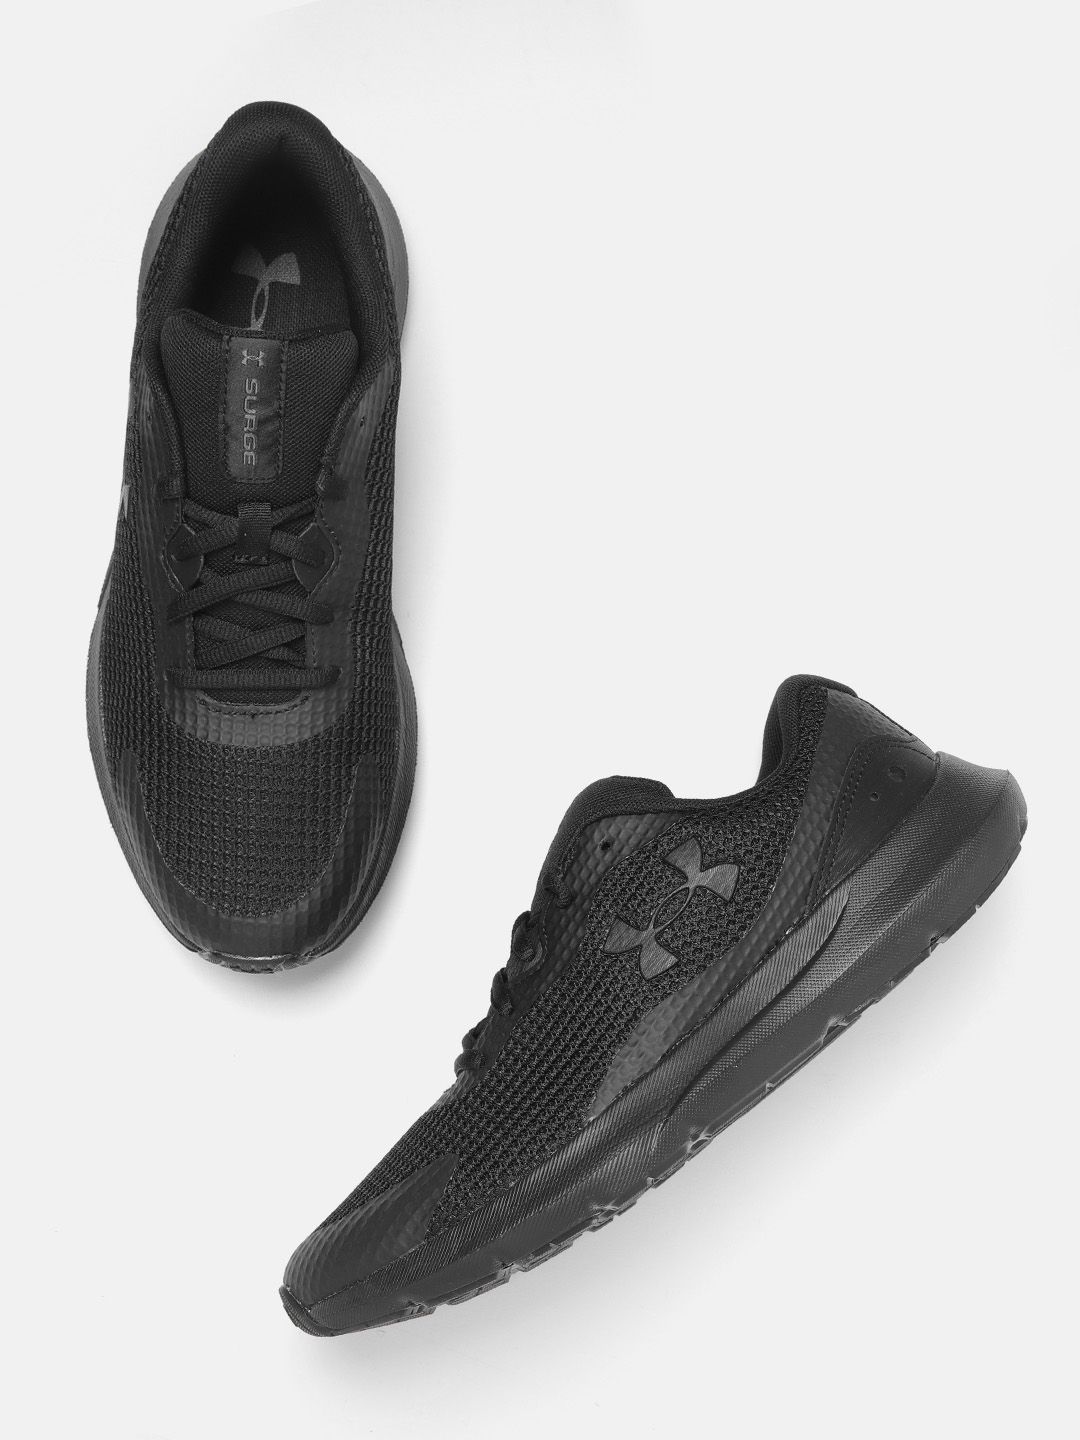 UNDER ARMOUR Women Black Woven Design Surge 3 Running Shoes Price in India